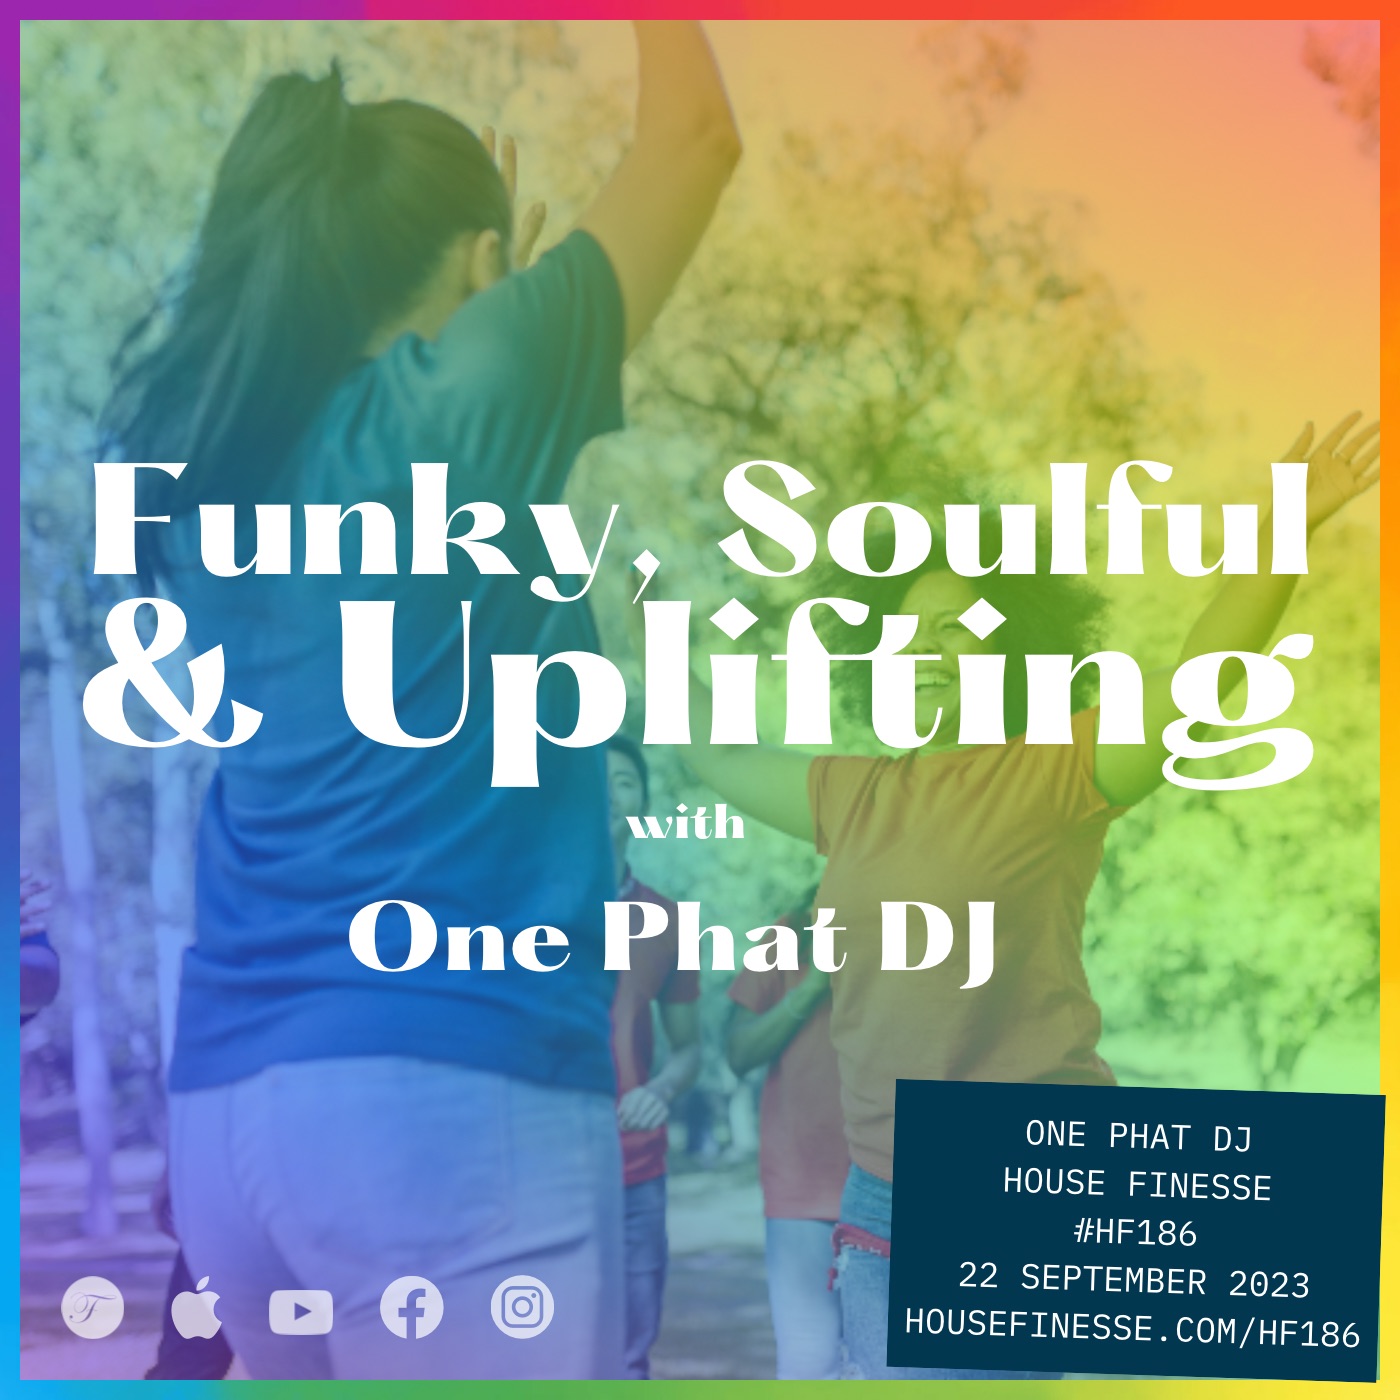 Funky, Soulful & Uplifting with One Phat DJ